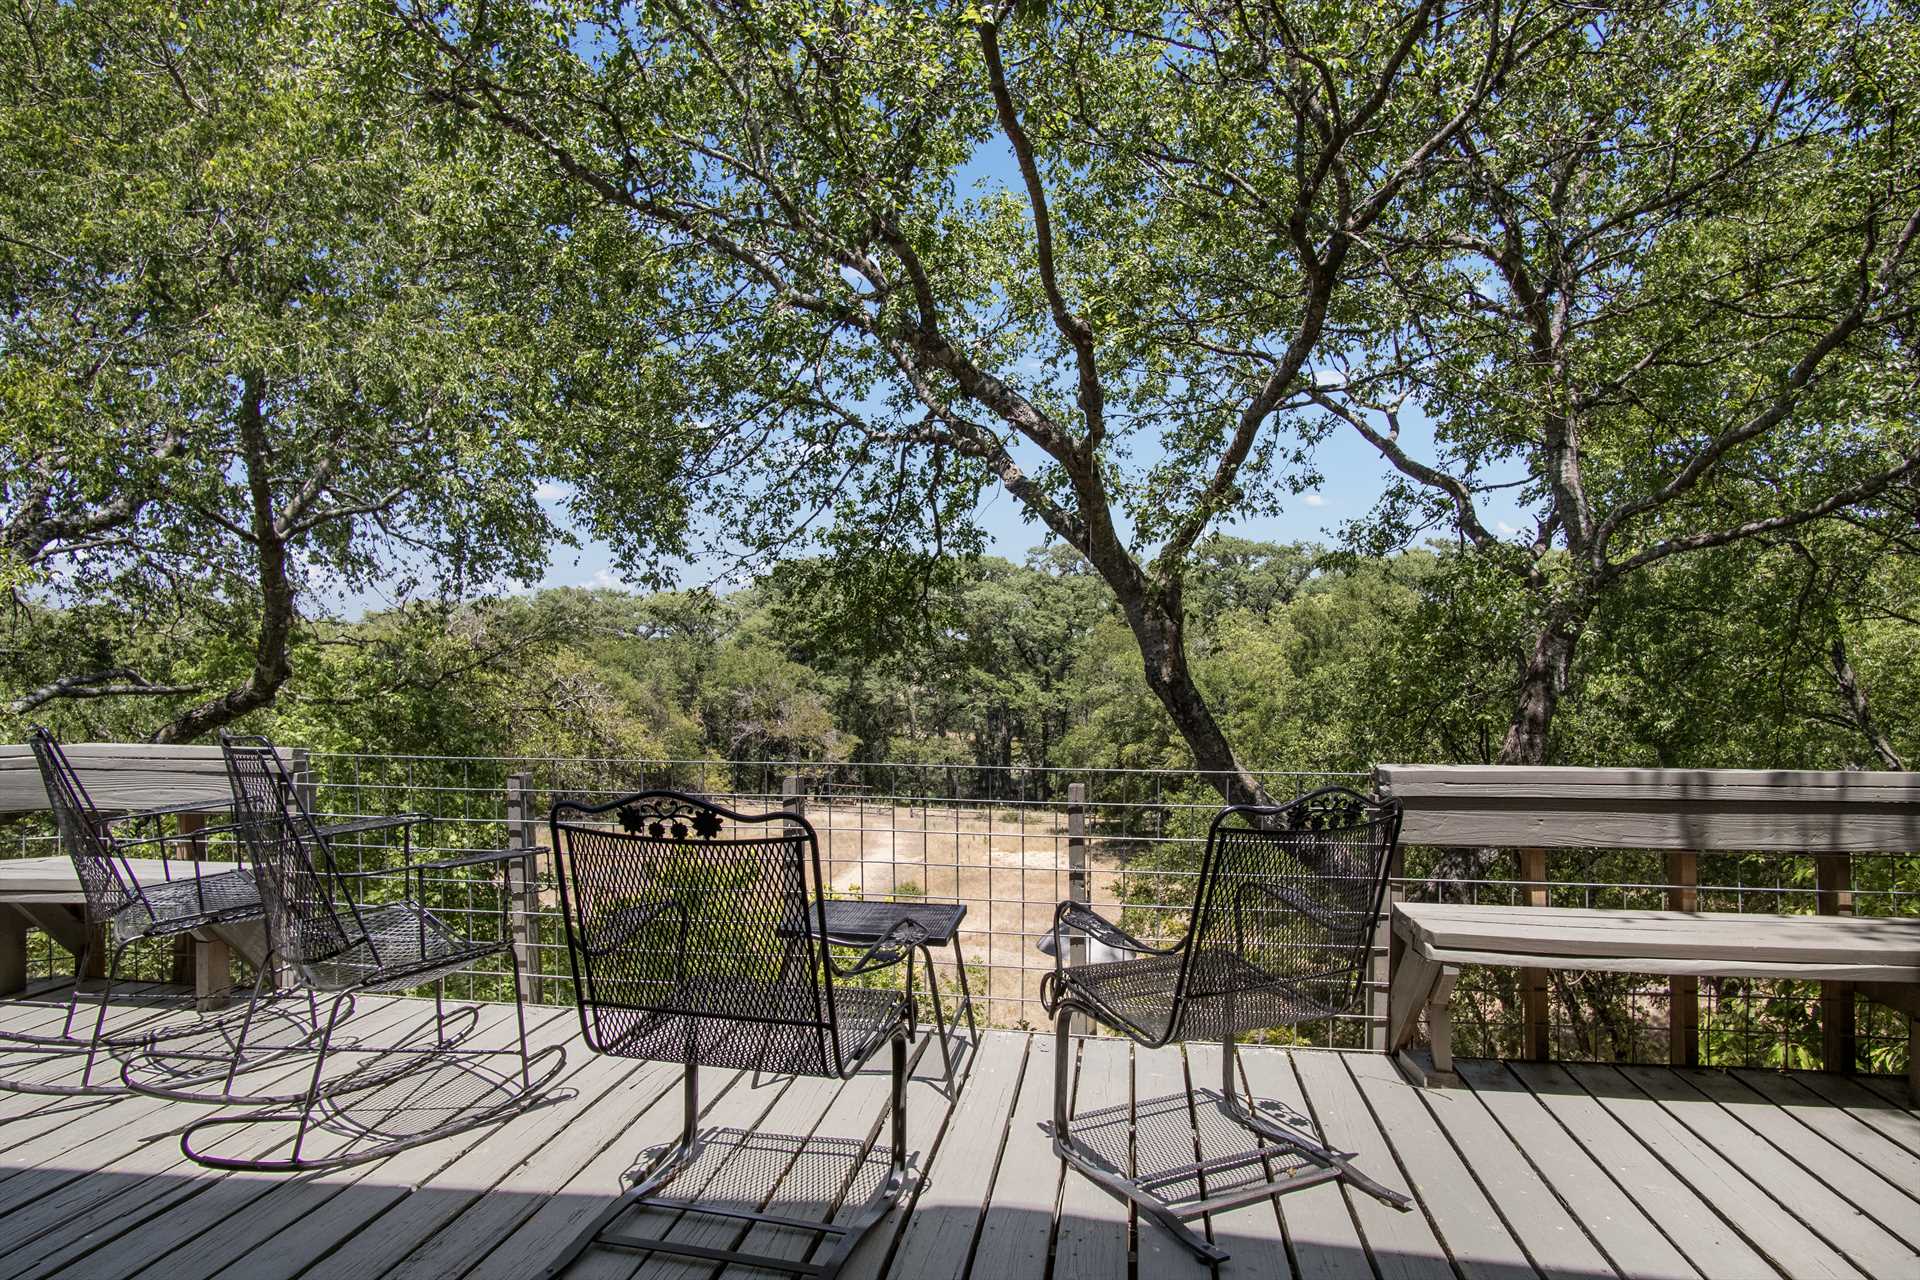                                                 Wildlife and plenty of bird species can be spotted from your comfy perch on the shaded deck!